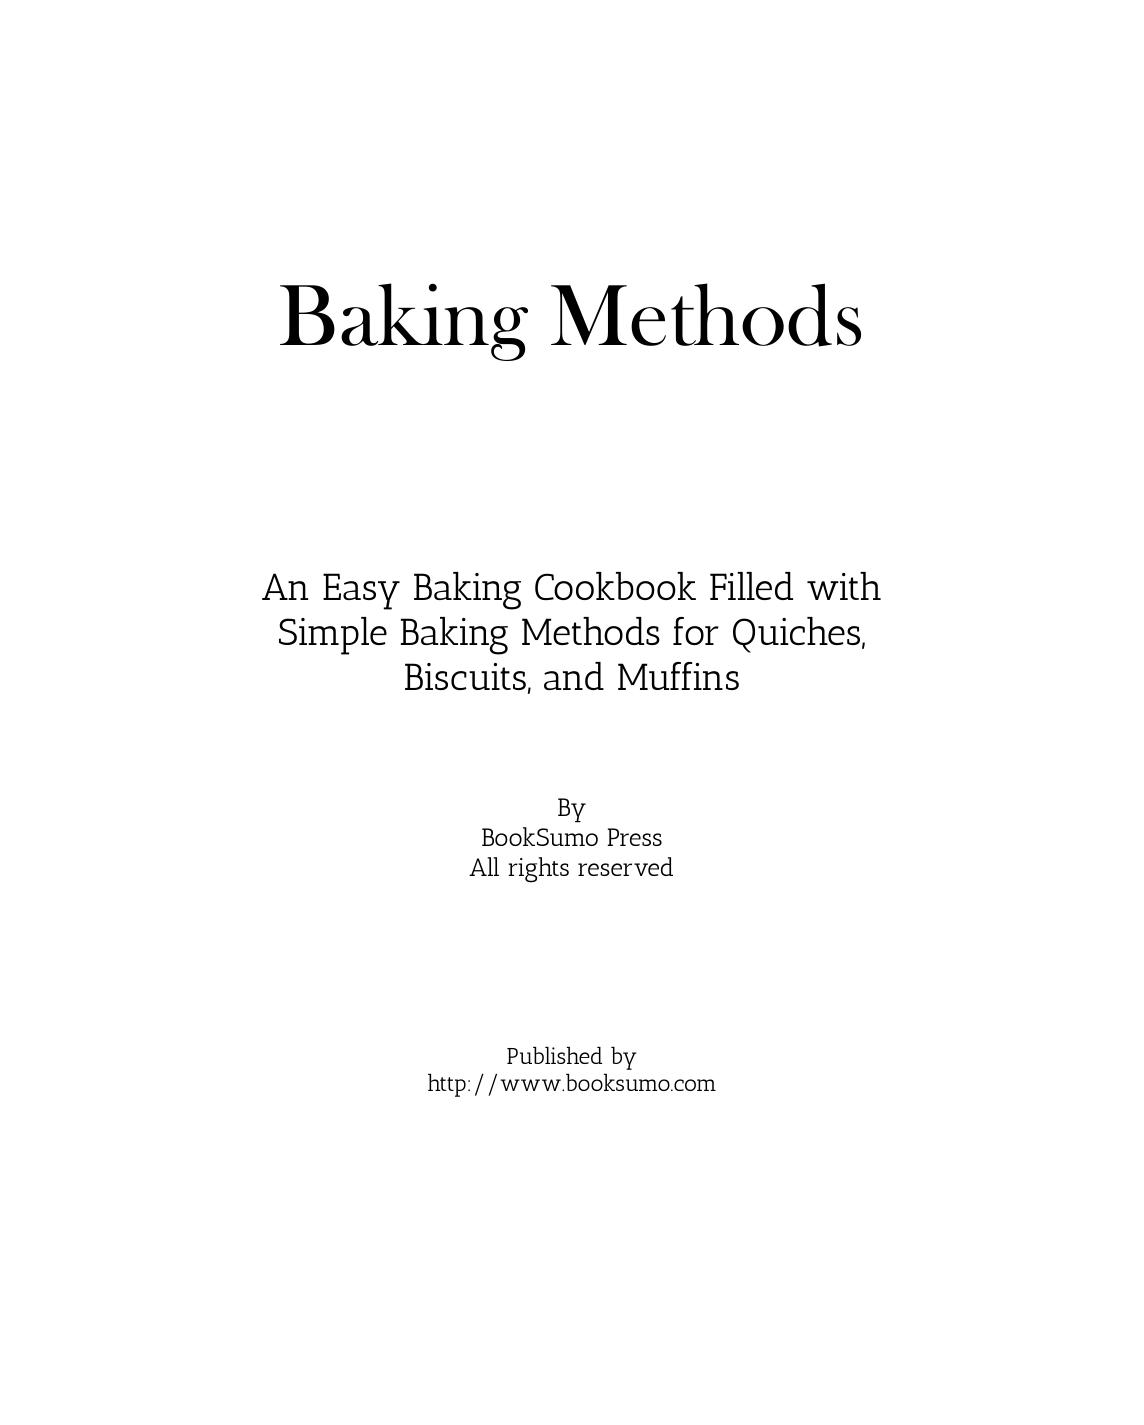 Baking Methods: An Easy Dessert Cookbook Filled with Simple Baking Recipes for Quiches, Biscuits, and Muffins by BookSumo Press